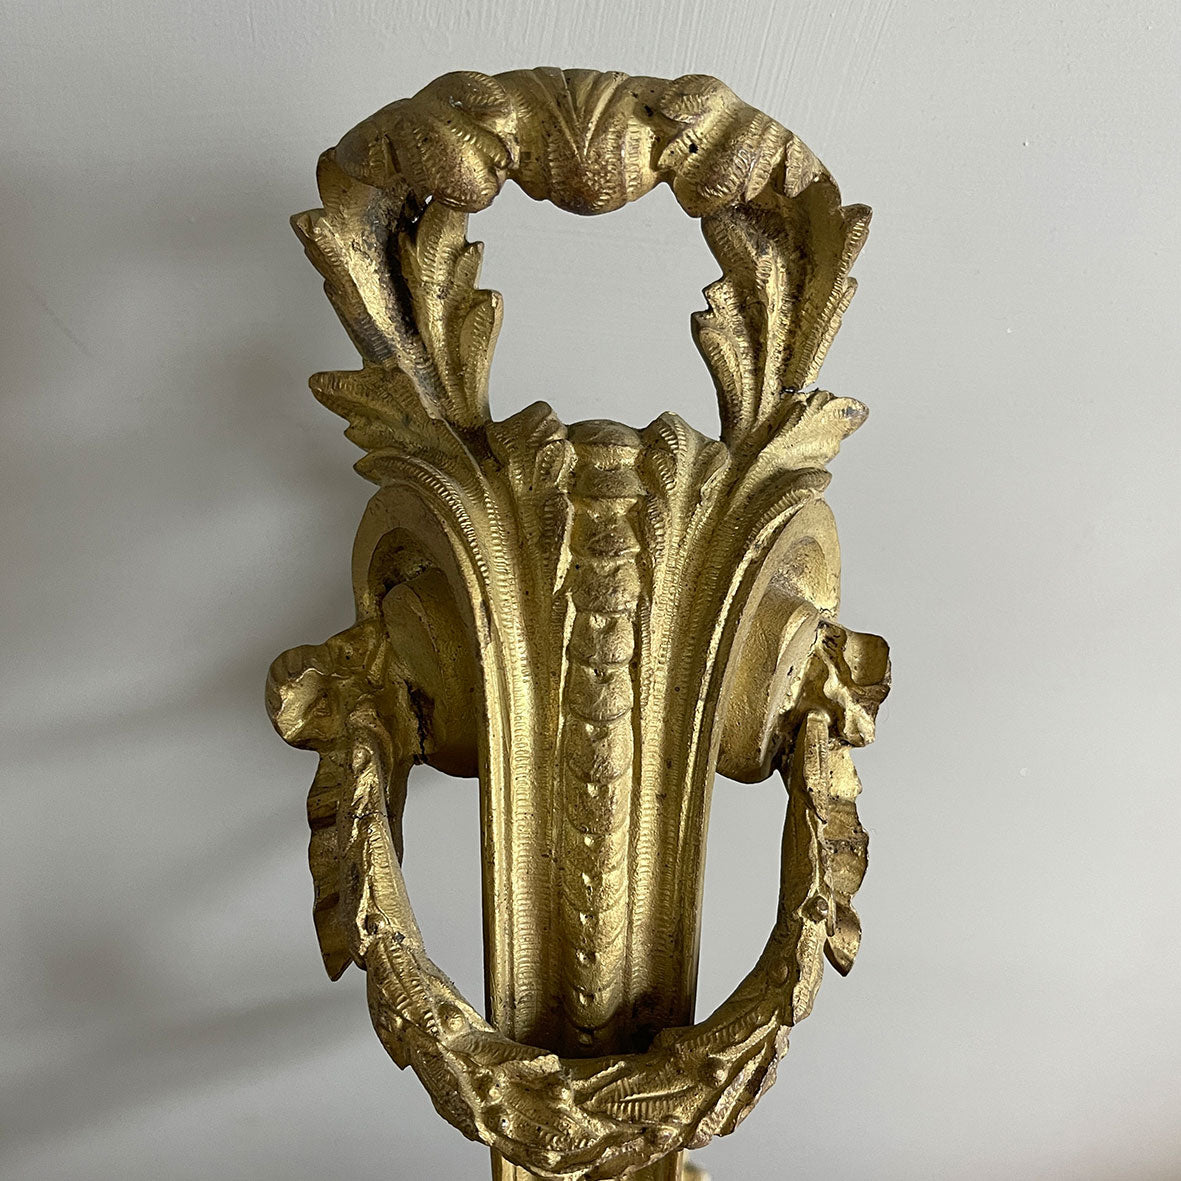 A pair of large antique french gilded 'ormolu' curtain rod brackets in the Louis XVI style - SHOP NOW - www.intovintage.co.uk